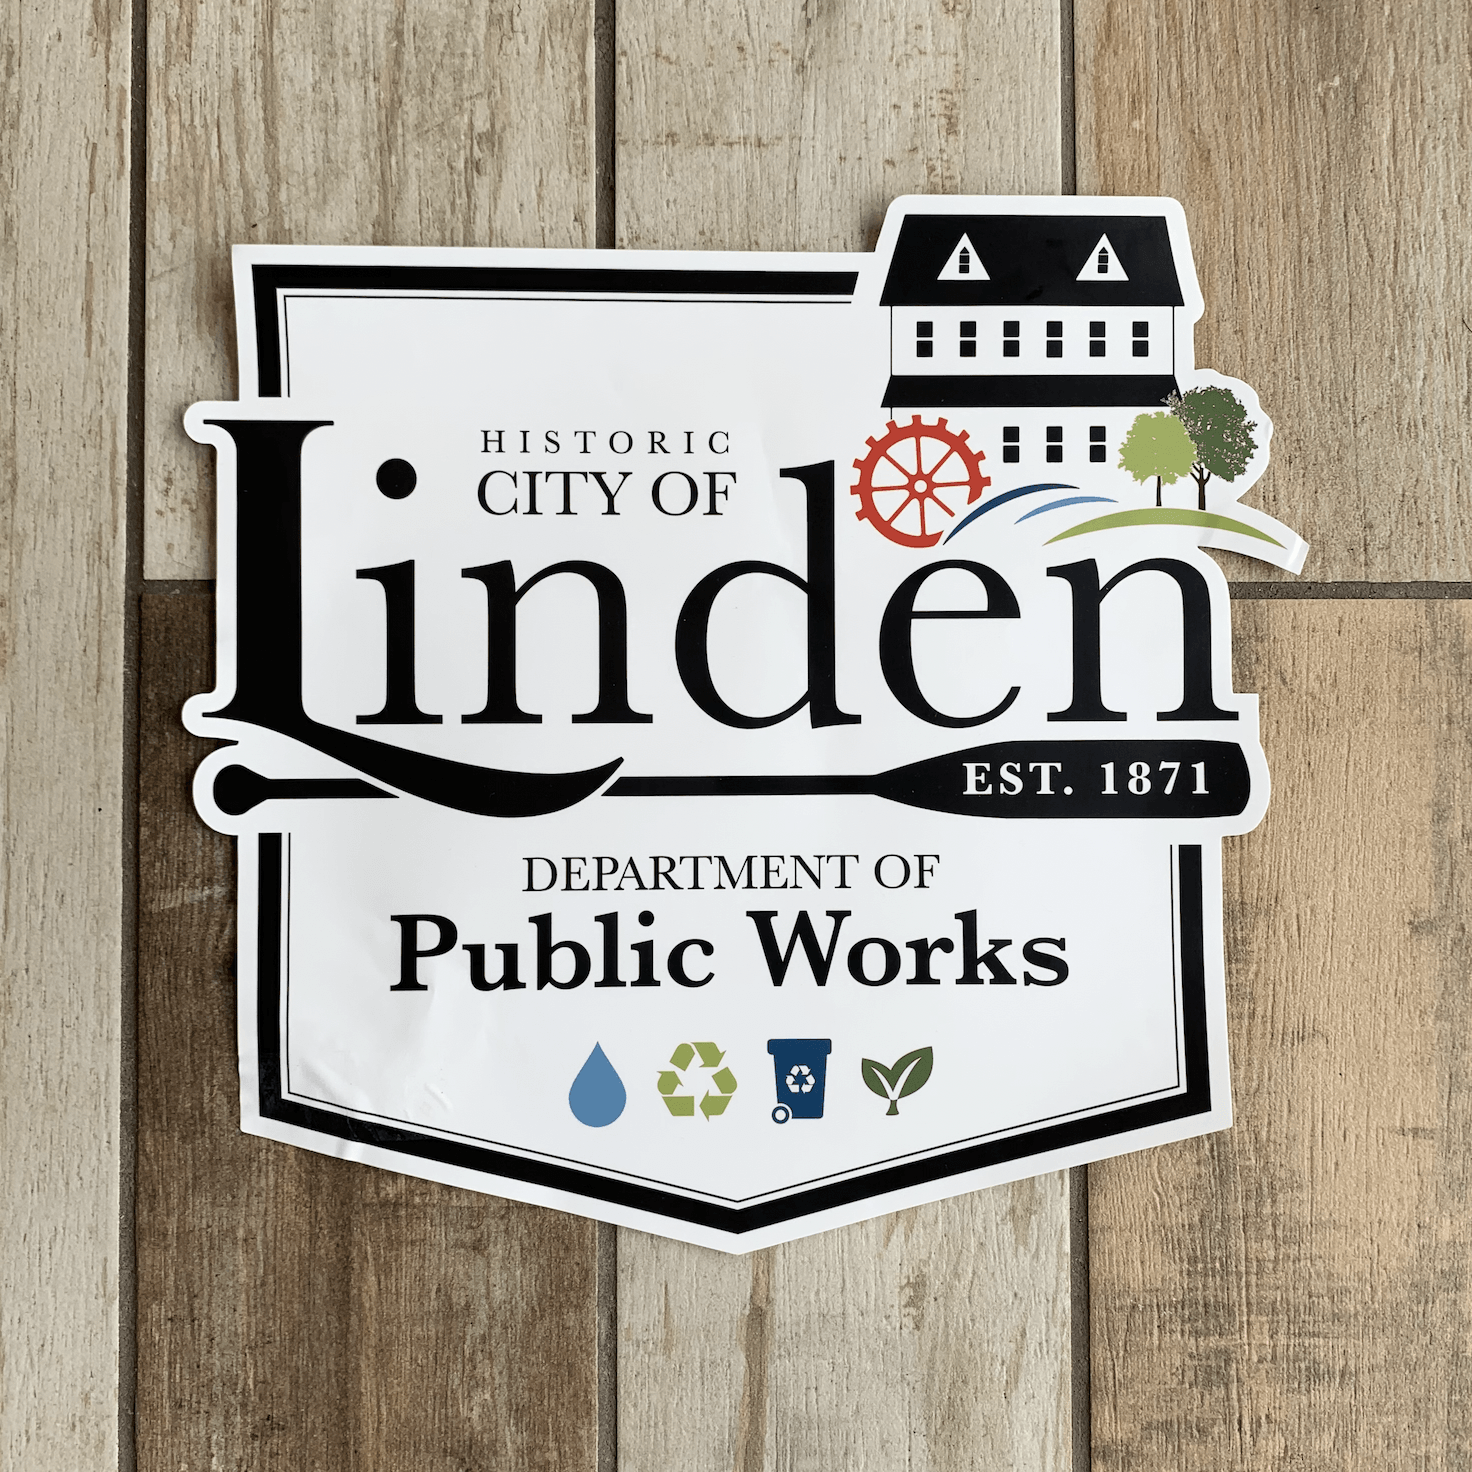 New Die Cut Truck Decals for City of Linden